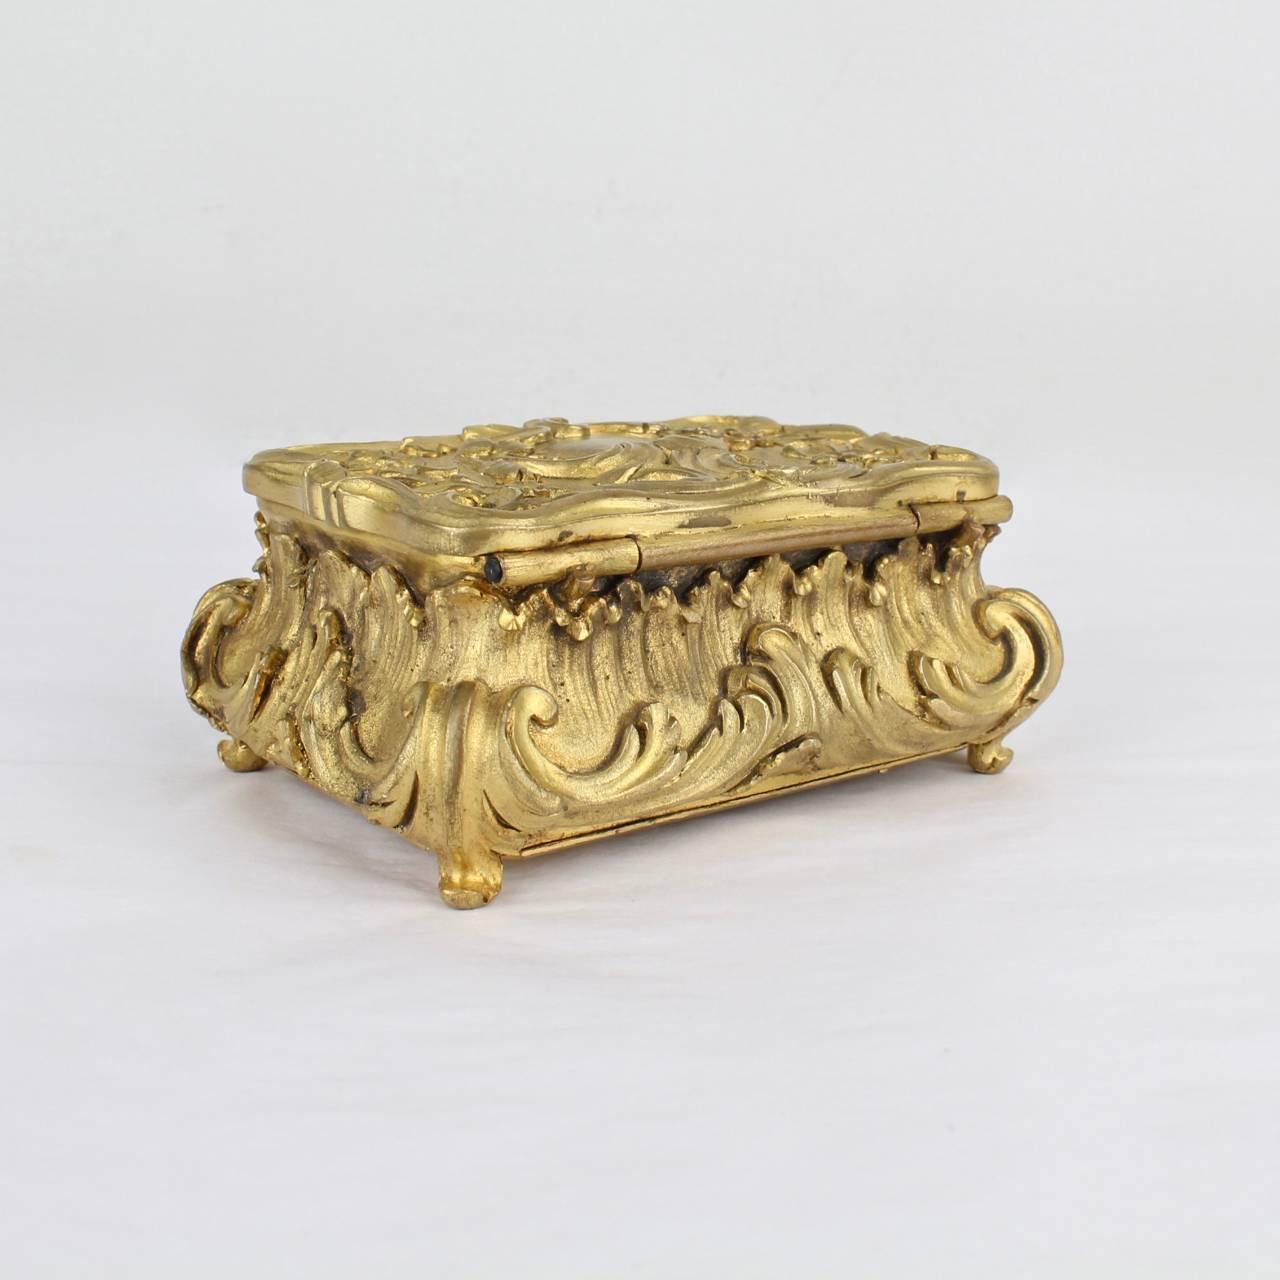 French Antique Small Doré Gilt Bronze Table Box or Casket, 19th Century